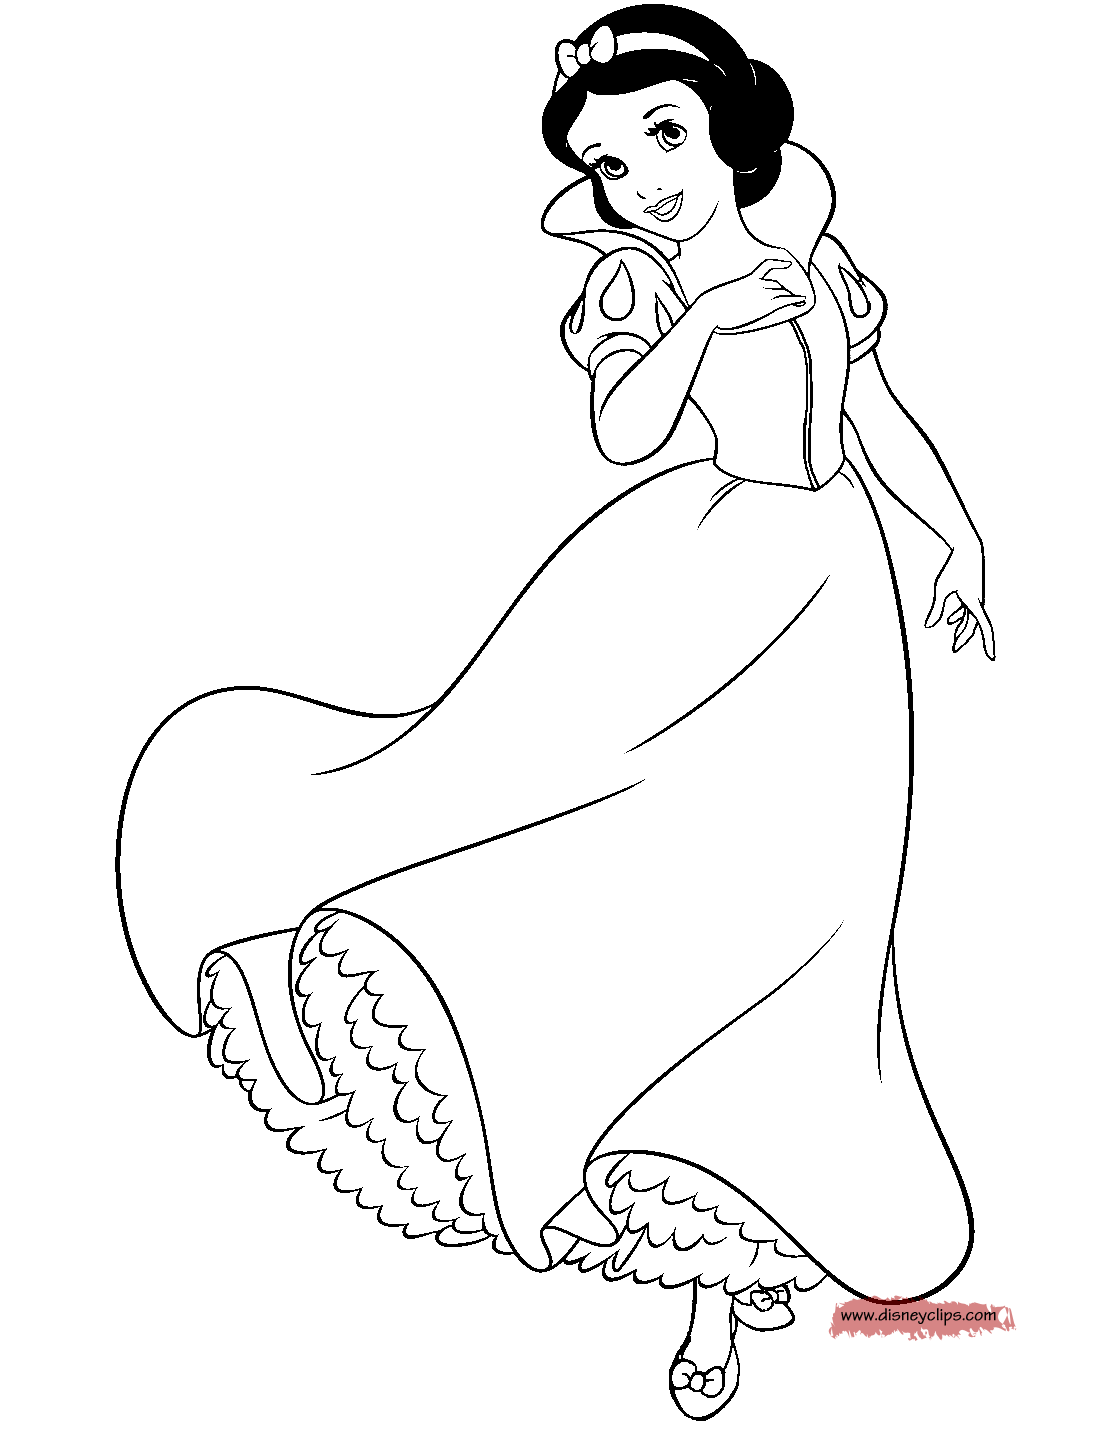 baby-snow-white-coloring-pages-carlita-chesser